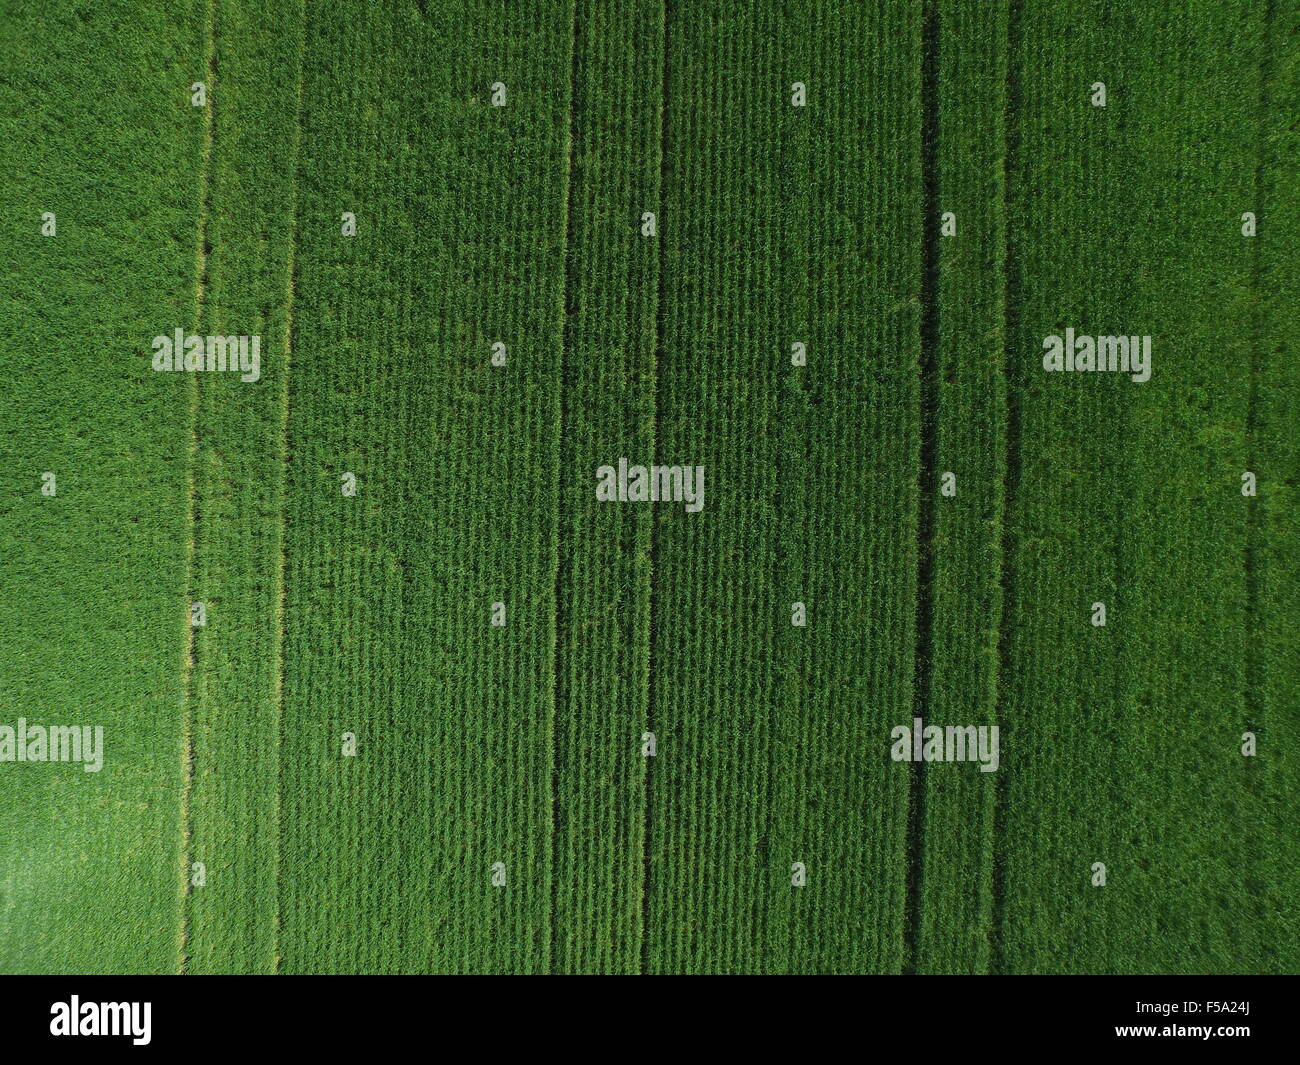 Wheat crop from above drone aerial image Stock Photo